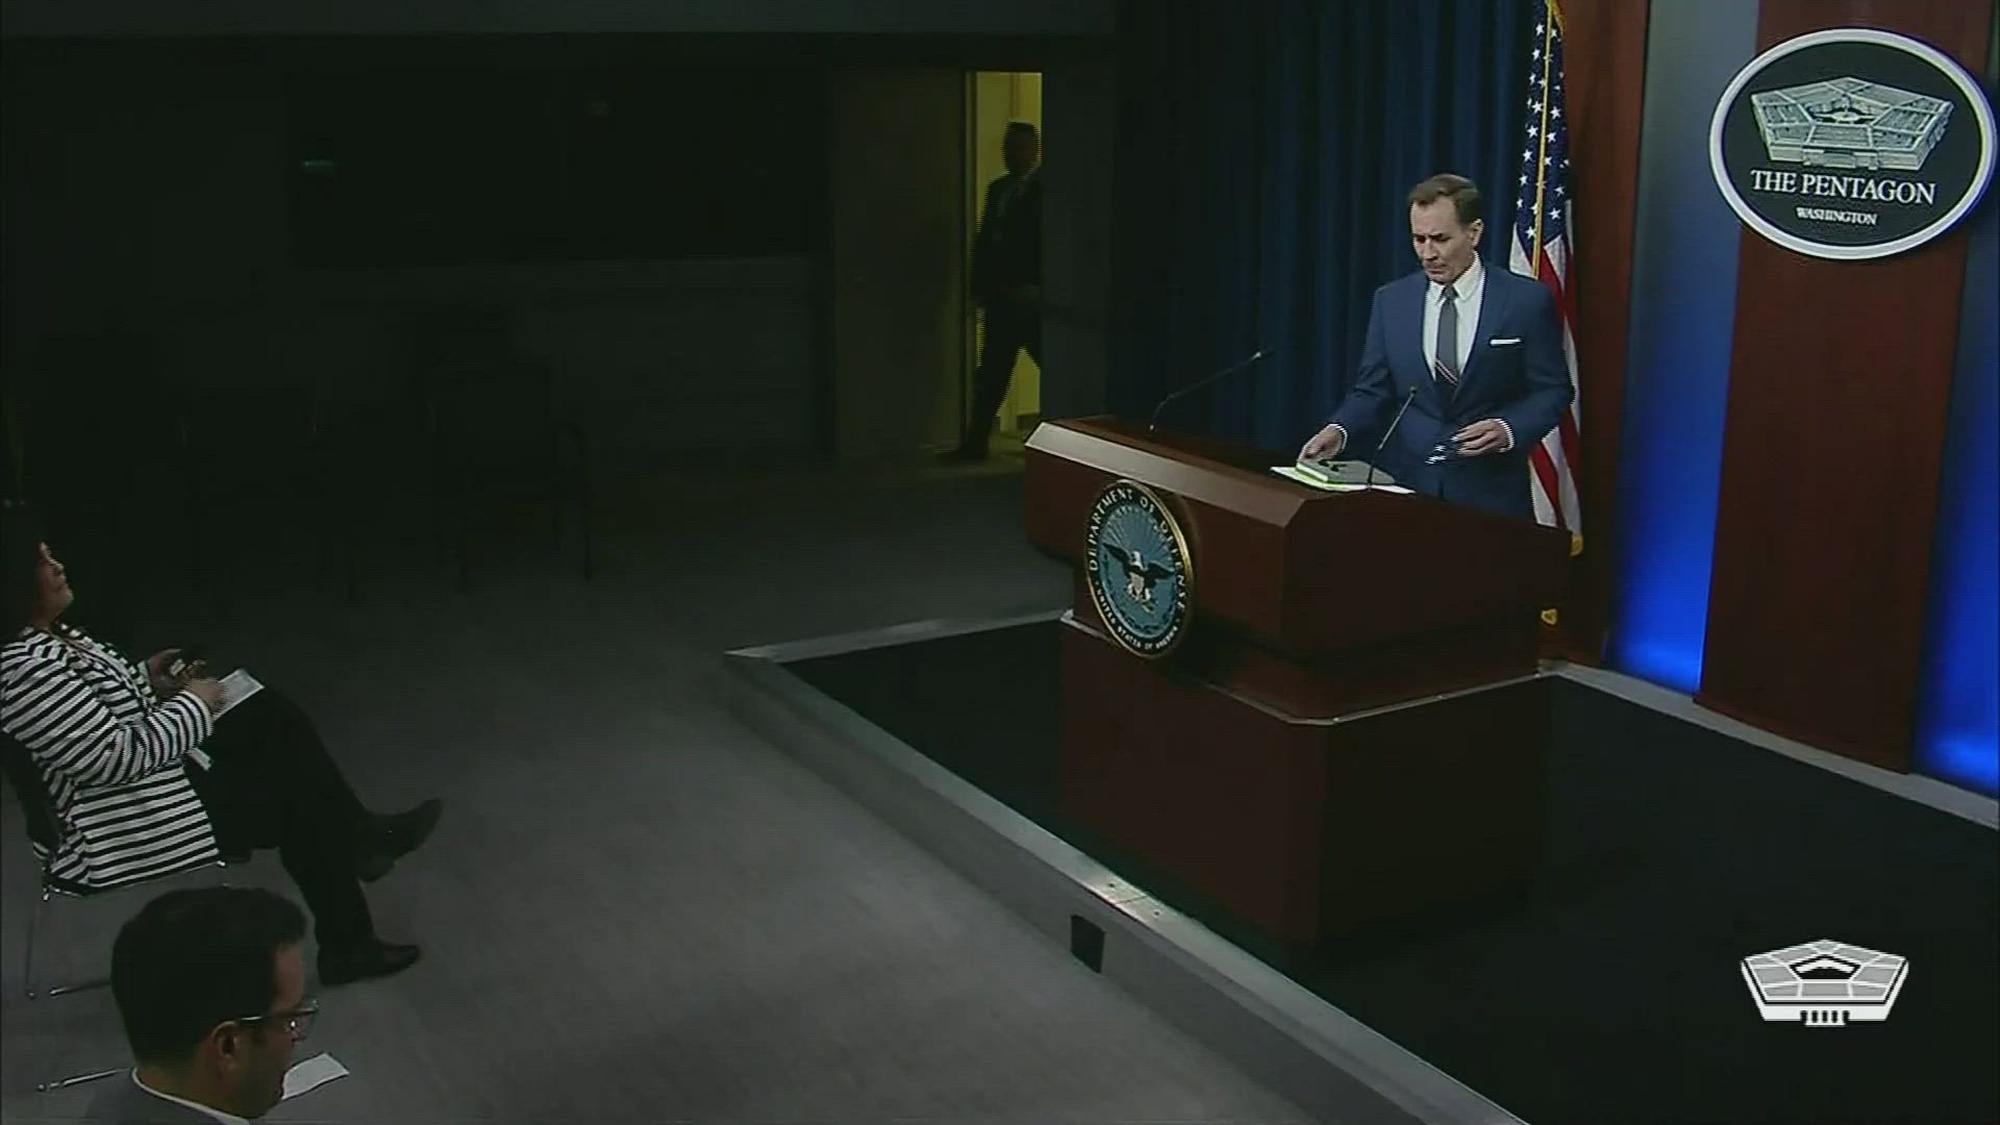 Pentagon Press Secretary John F. Kirby briefs members of the media during a news conference at the Pentagon in Washington, D.C.